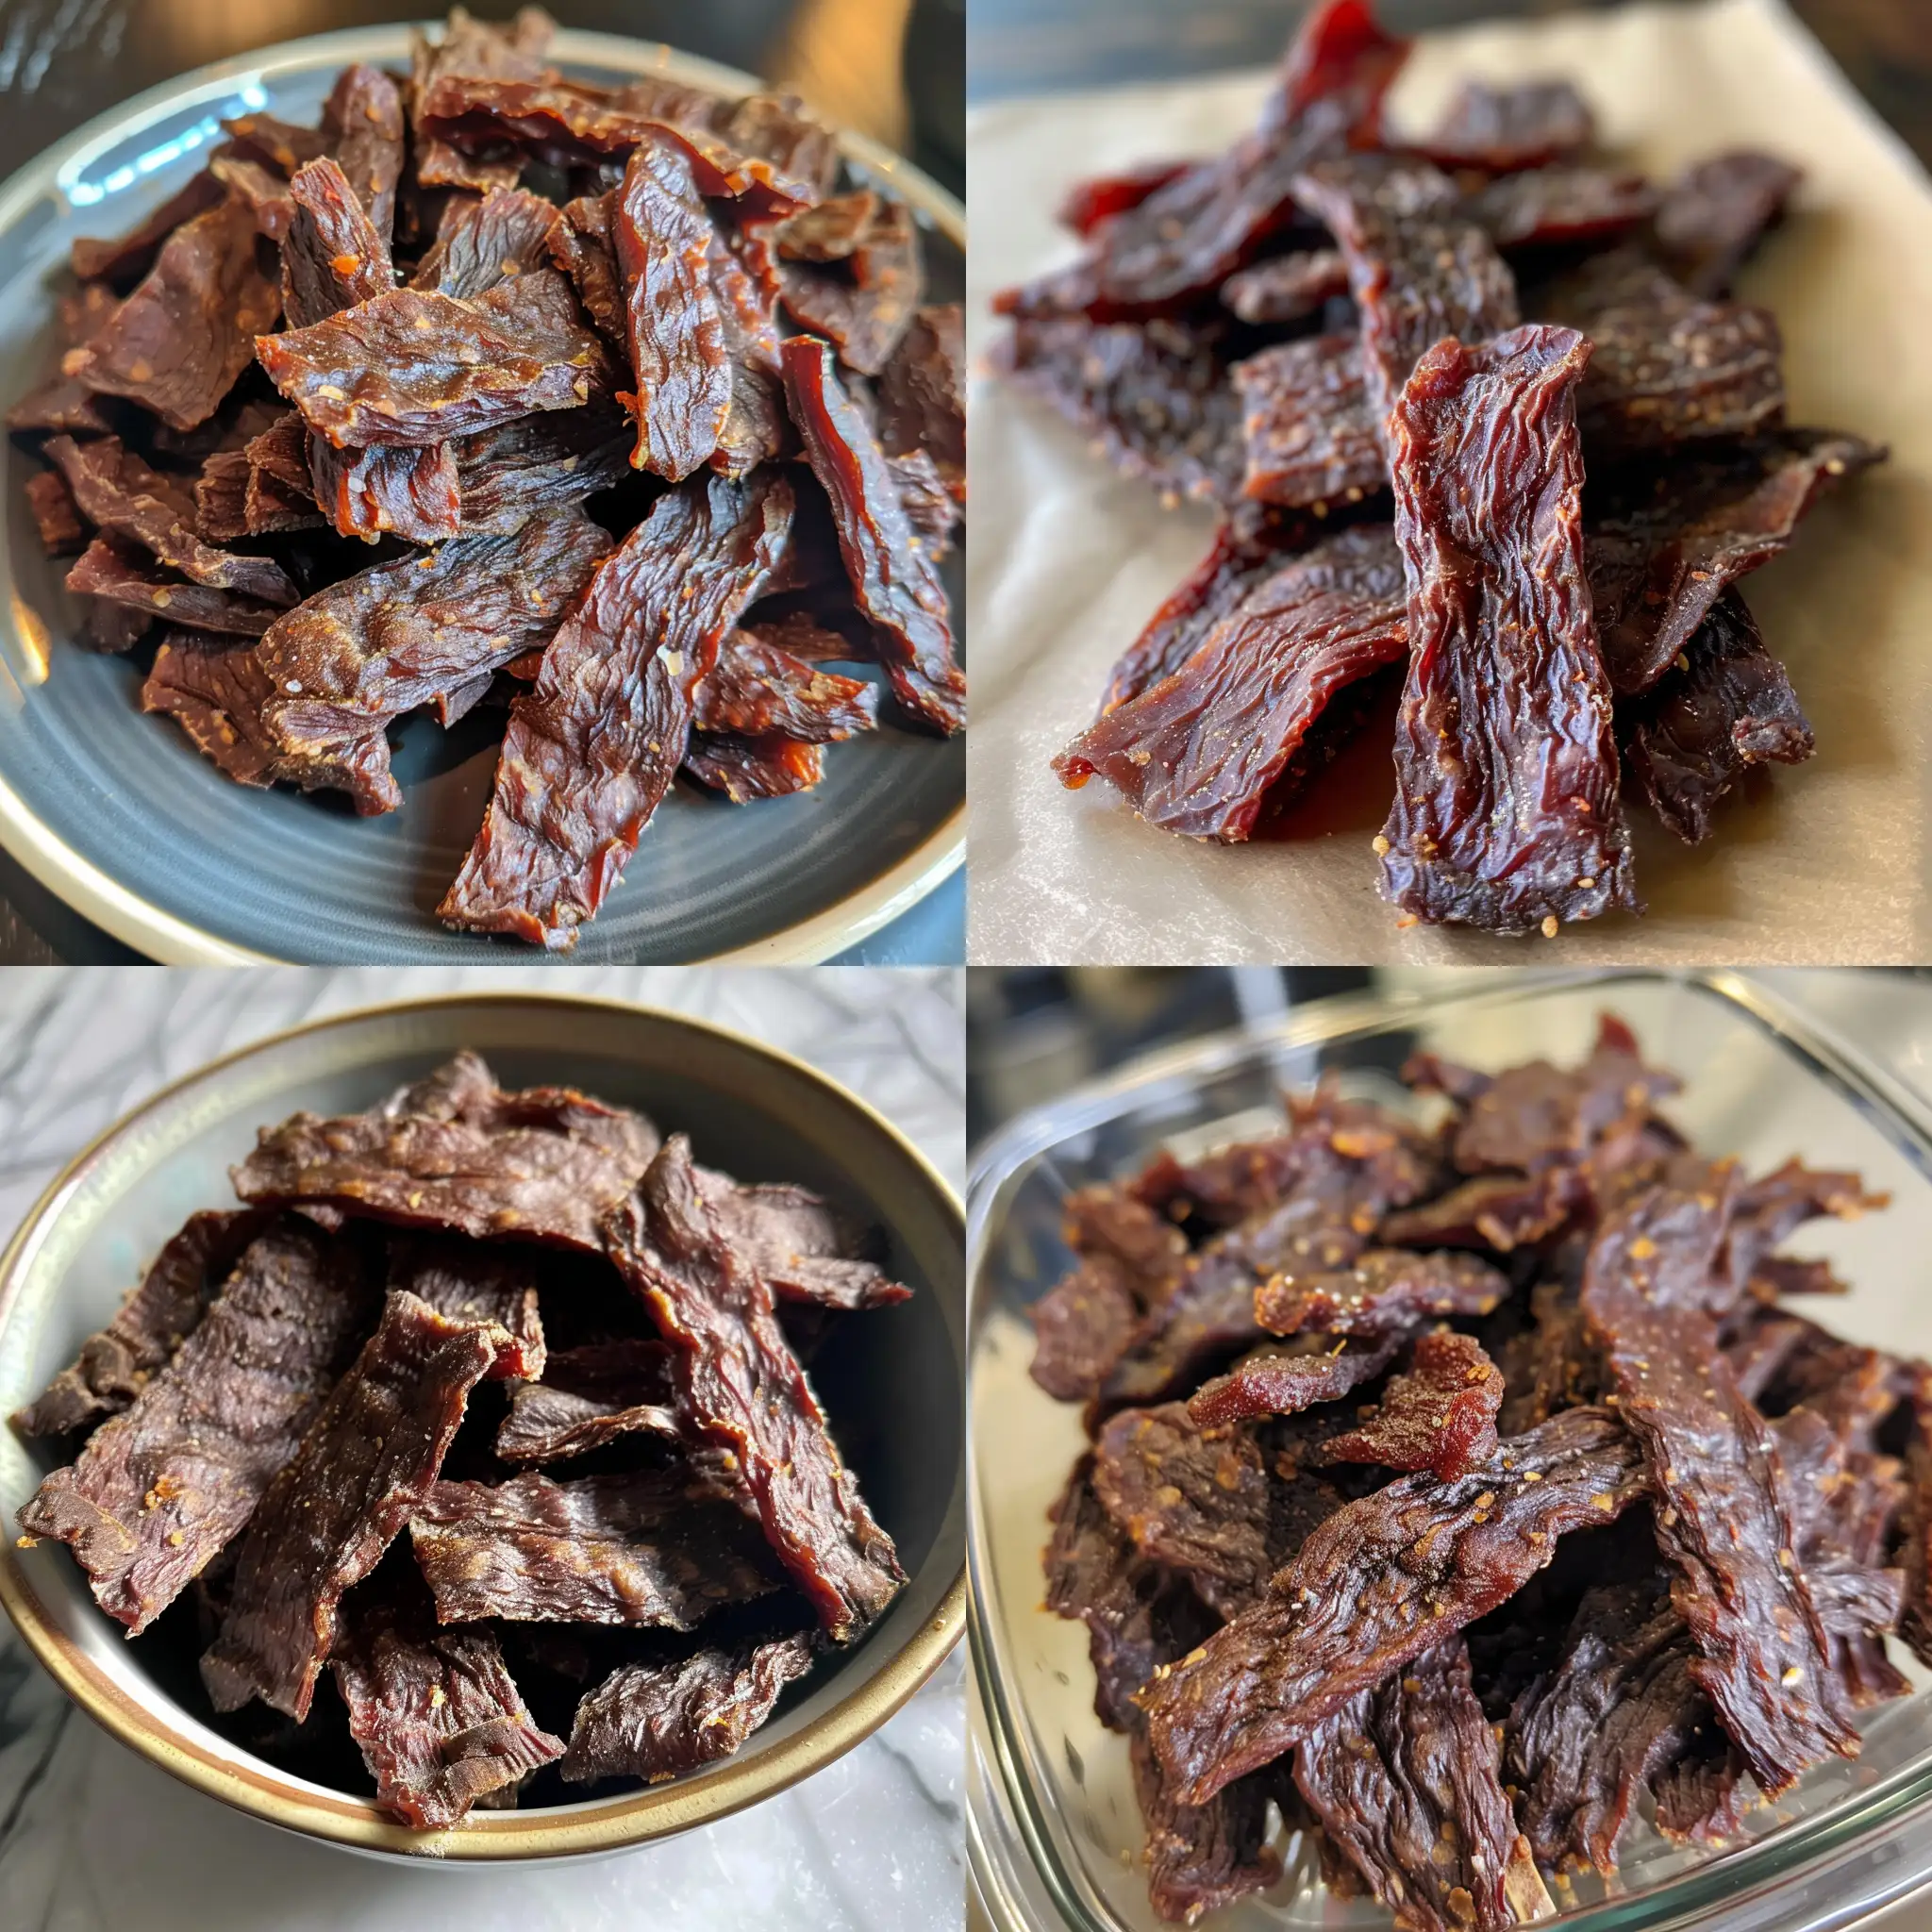 Assorted-Beef-Jerky-Selection-on-Rustic-Wooden-Table